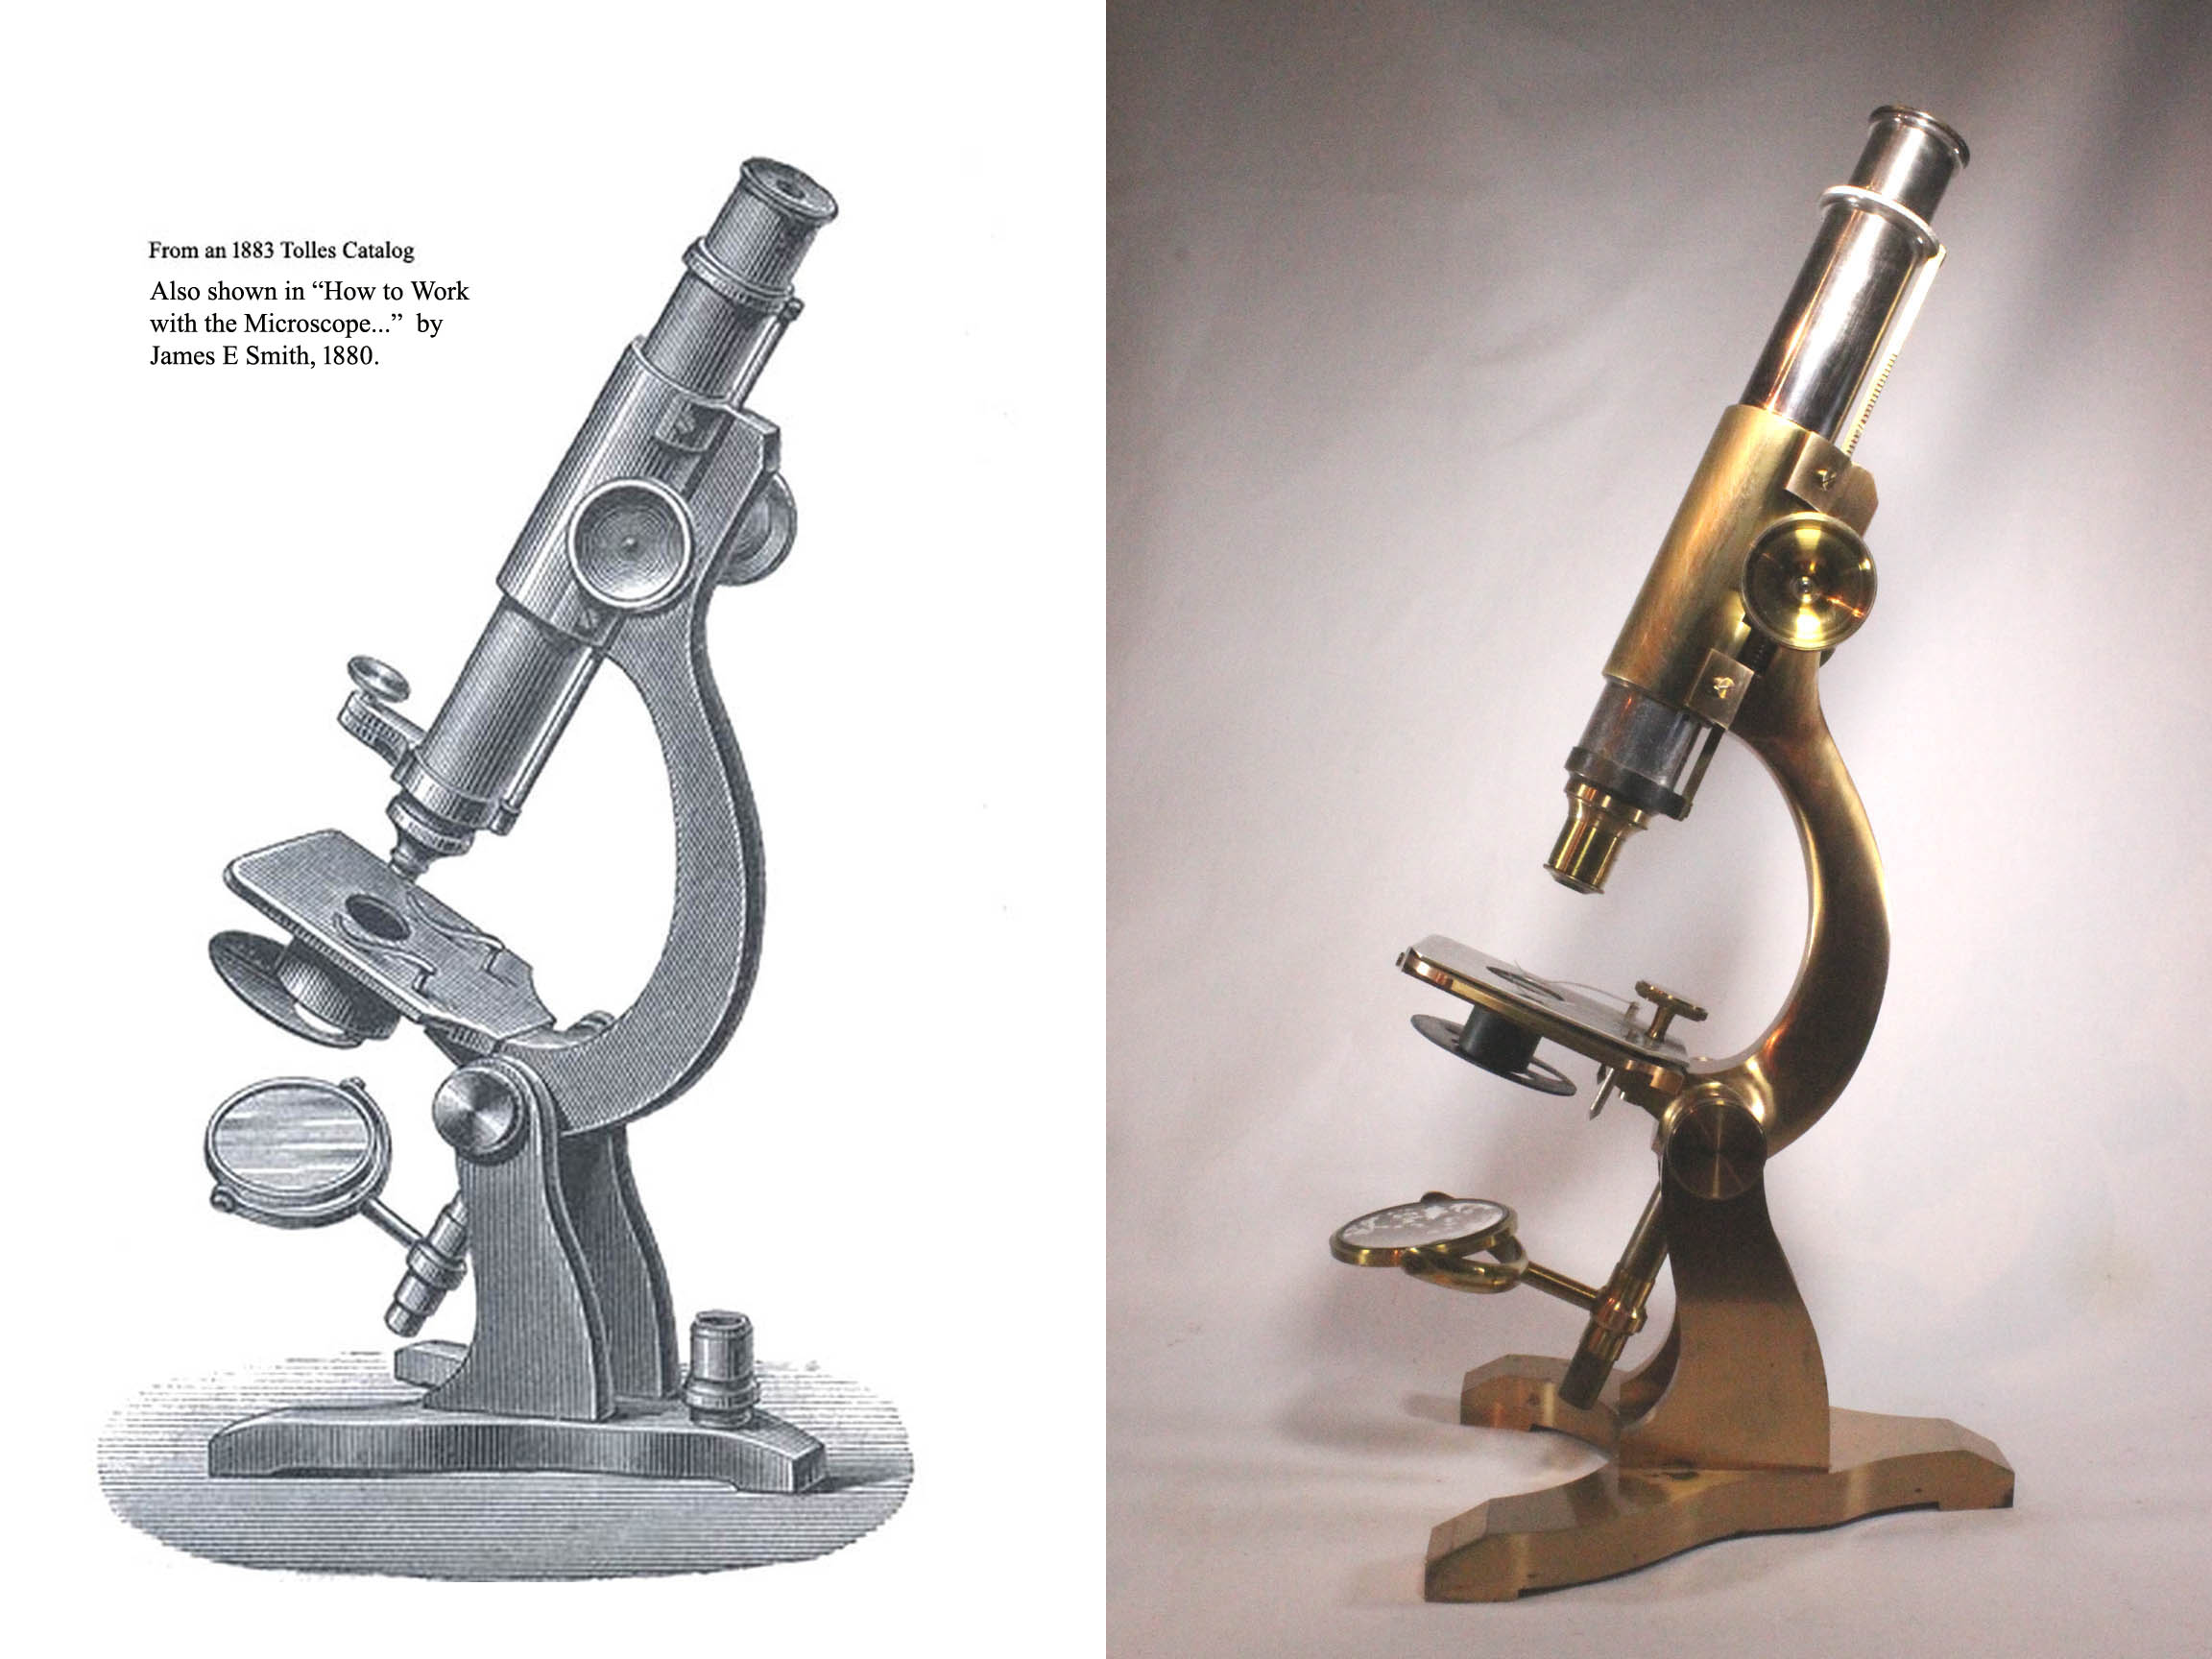 Tolles Student Microscope with Engraving side by side